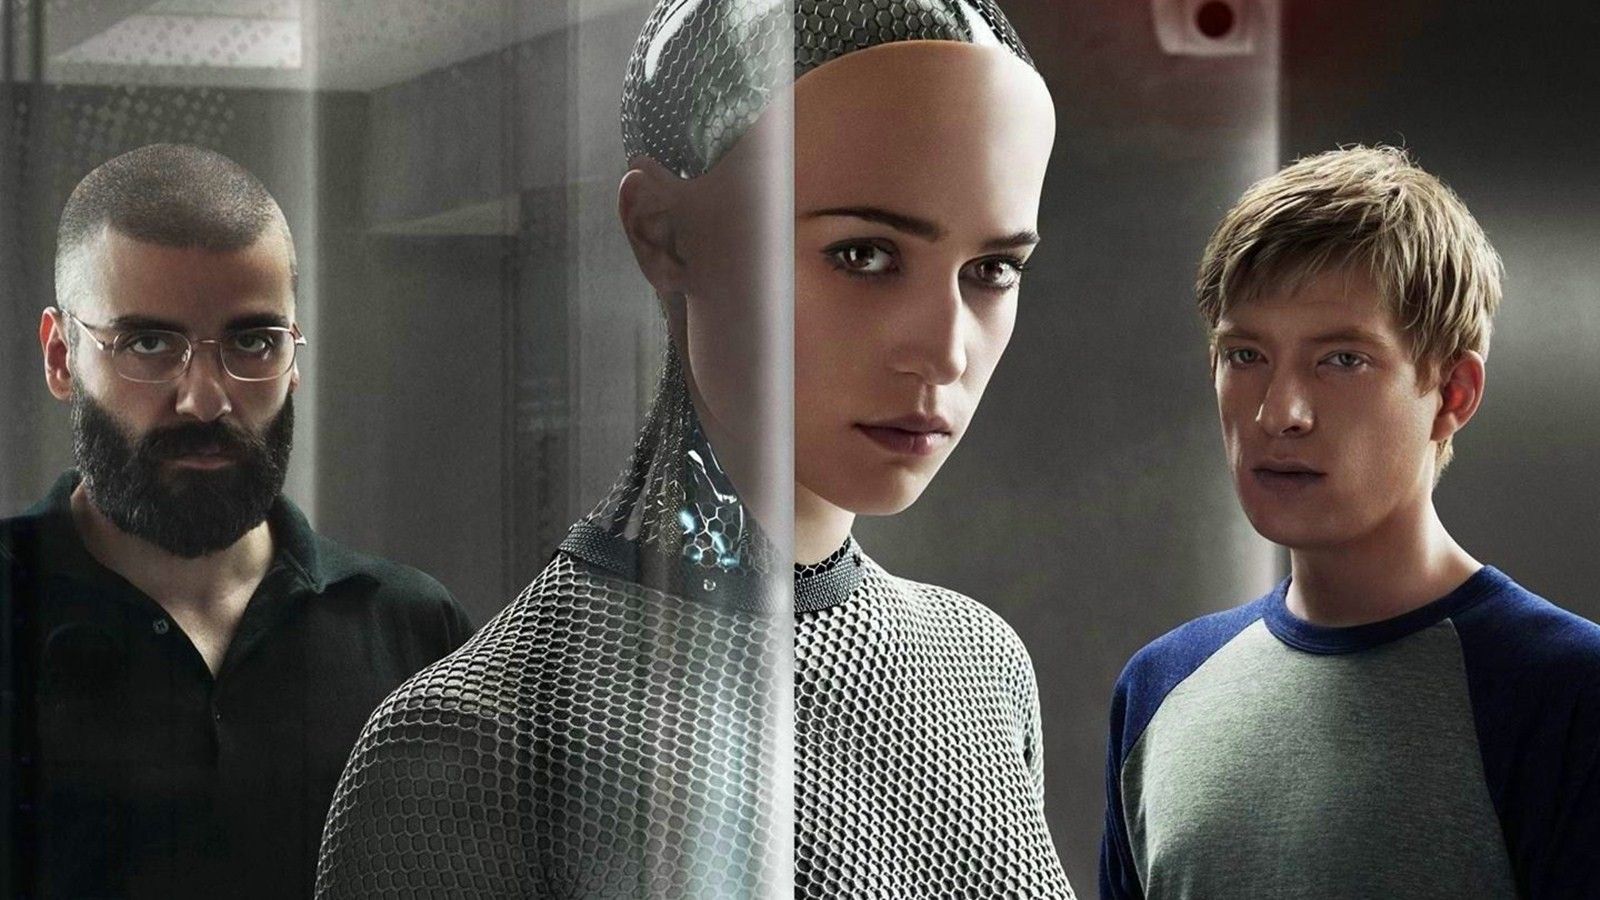 Watch: 'Ex Machina' Shows How to Use Your Character as a Vessel for Story